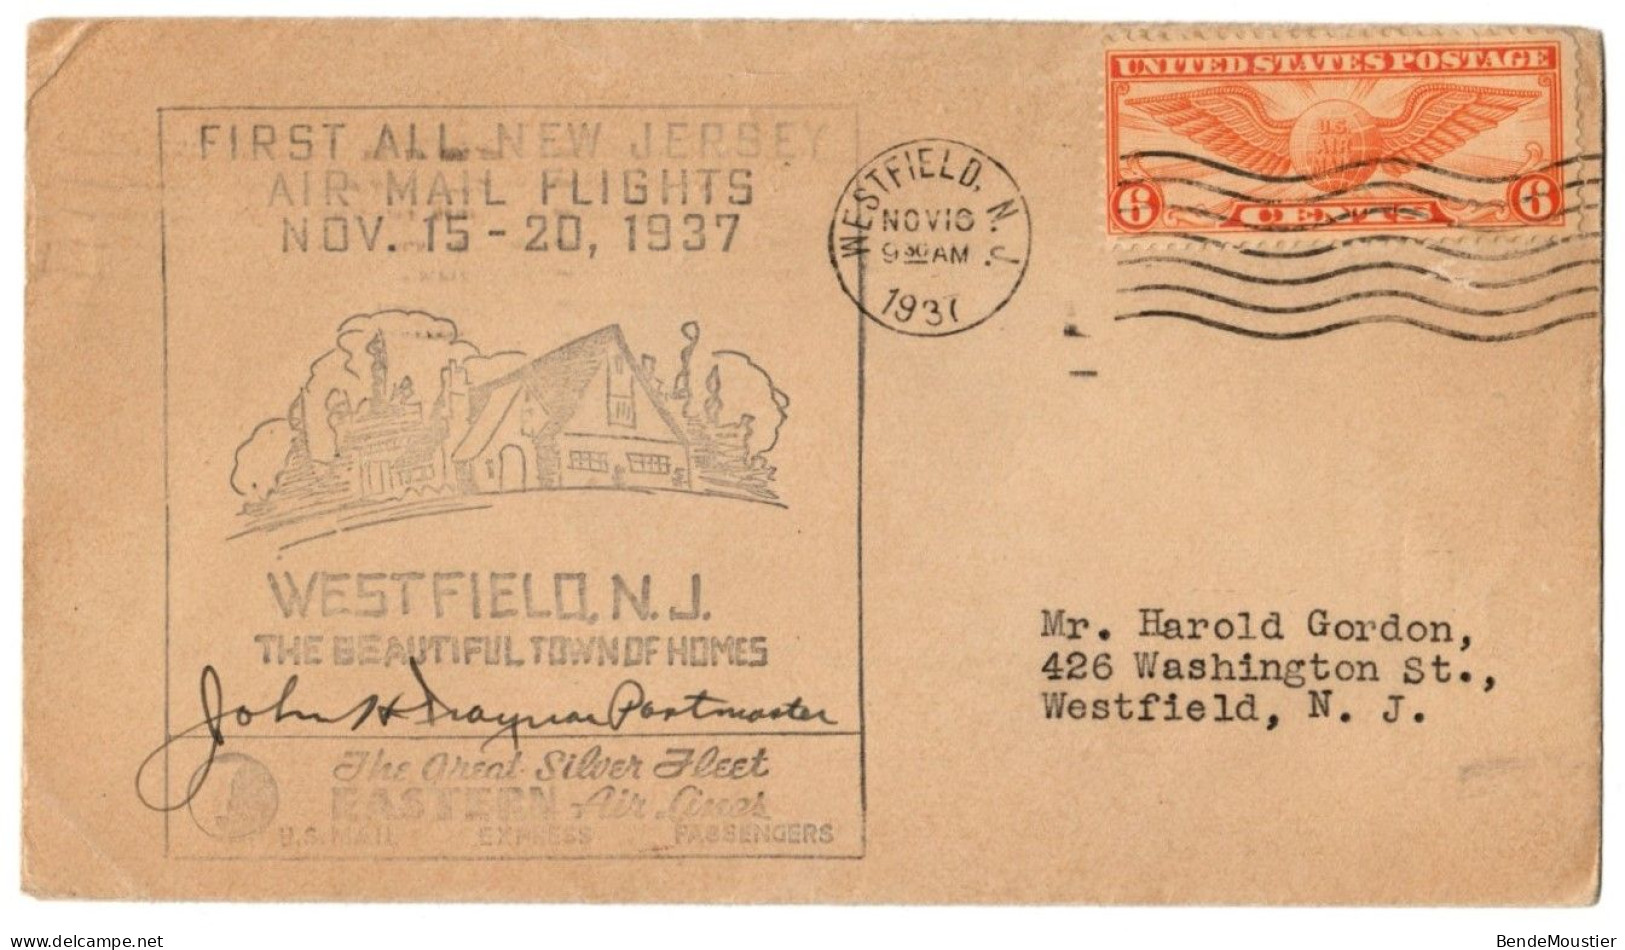 (R113) USA Scott  # C19 -  Air Mail Flights -  New Jersey - Westfield - 6 Cts Winged Globe - 1937. - 1c. 1918-1940 Covers